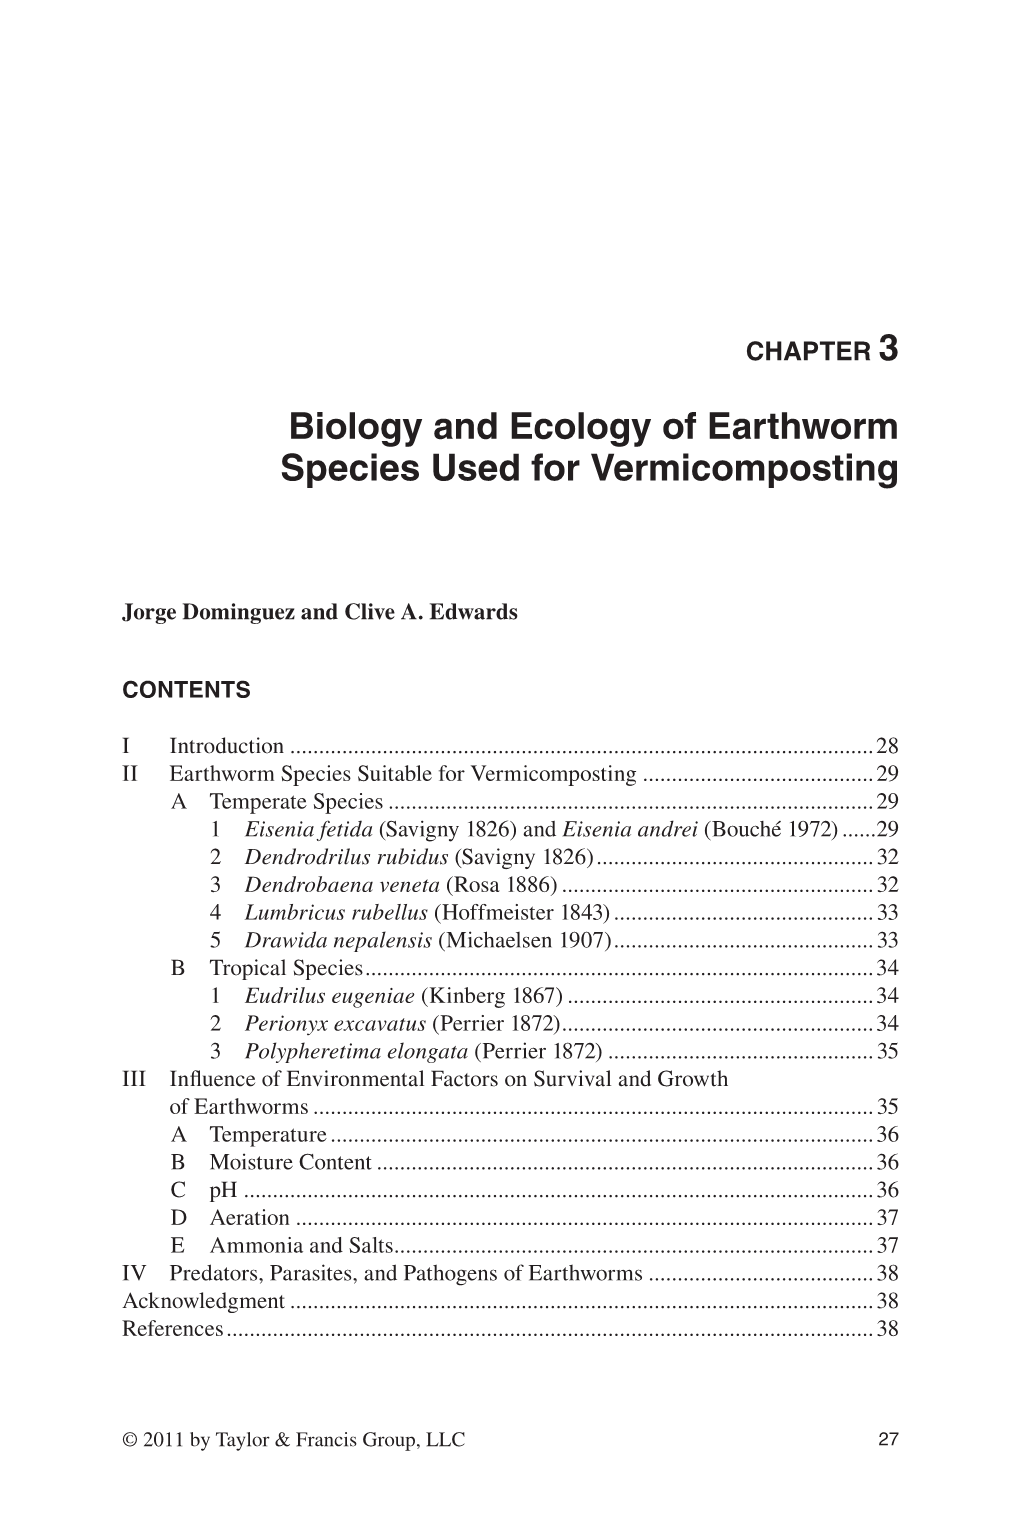 Biology and Ecology of Earthworm Species Used for Vermicomposting